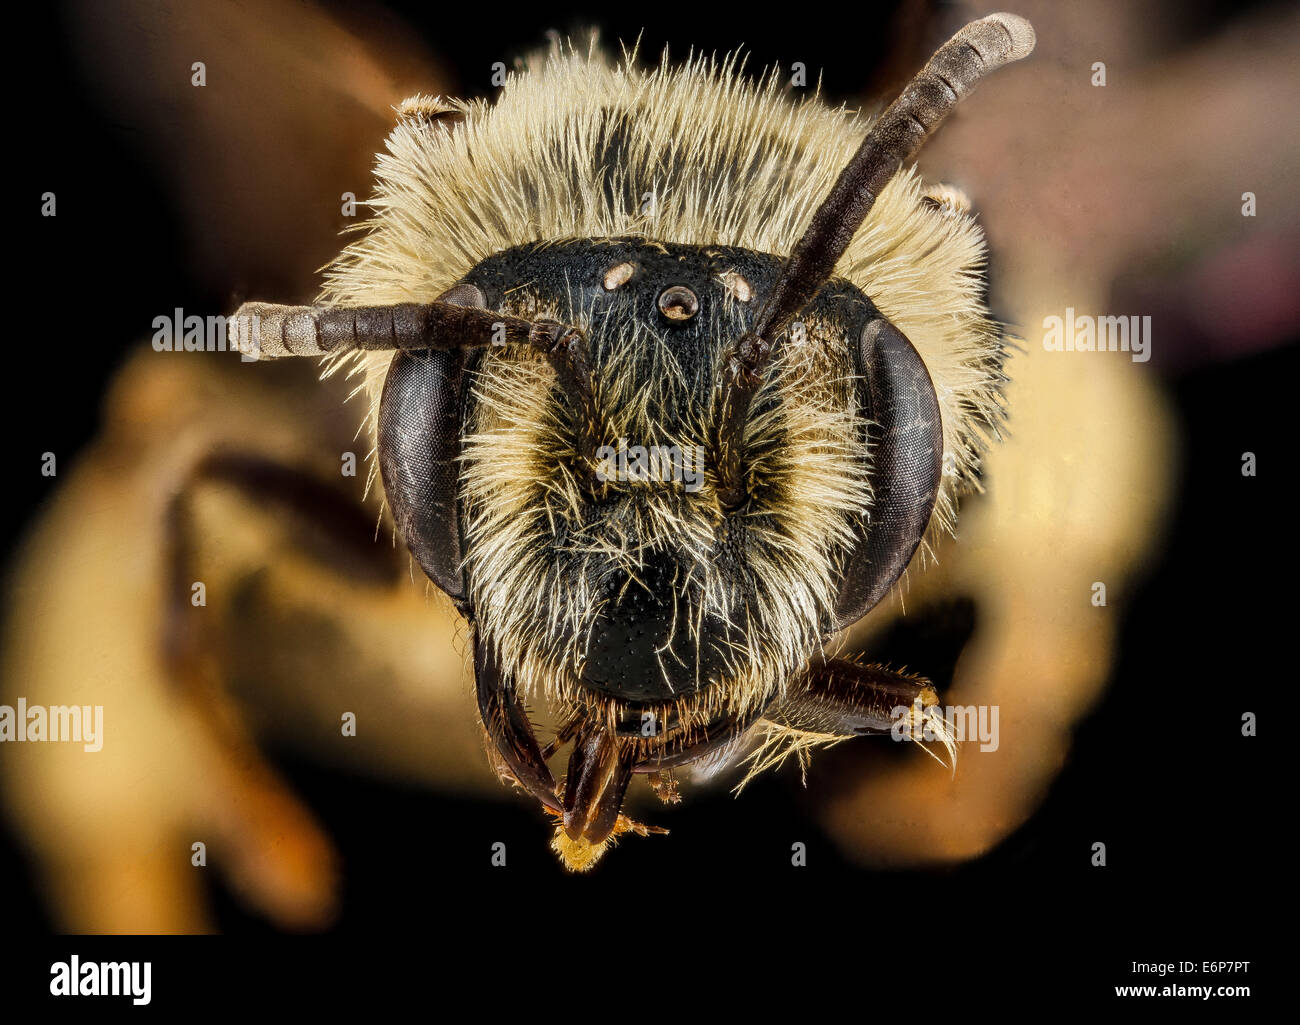 Andrena Bisalicis, Weiblich, face 2012-08-06-175457 ZS PMax 8027481566 o Andrena Bisalicis, Weiblich, Carolina Sandhills National Wildlife Refuge, SC, Chesterfield County Andrena Bisalicis, Weiblich, face 2012-08-06-17.54.57 ZS PMax Stockfoto